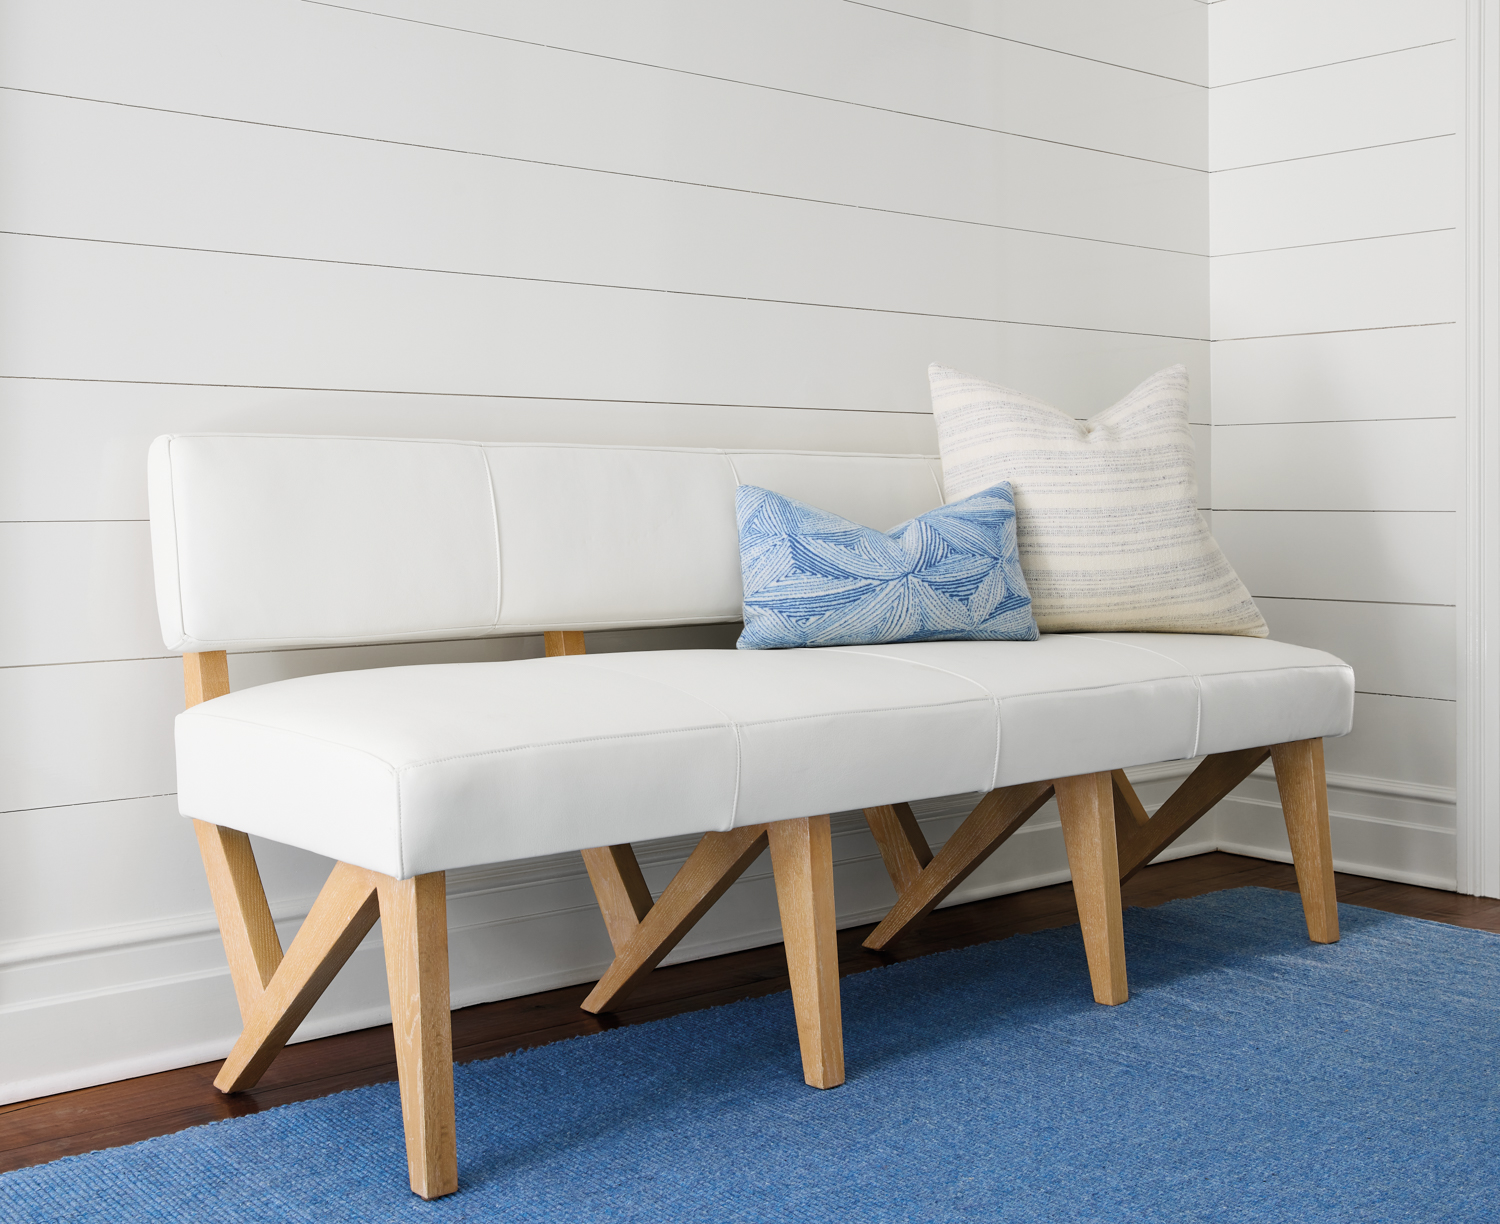 Bench with white upholstery and light wood frame topped and with blue and white pillows on a blue rug.